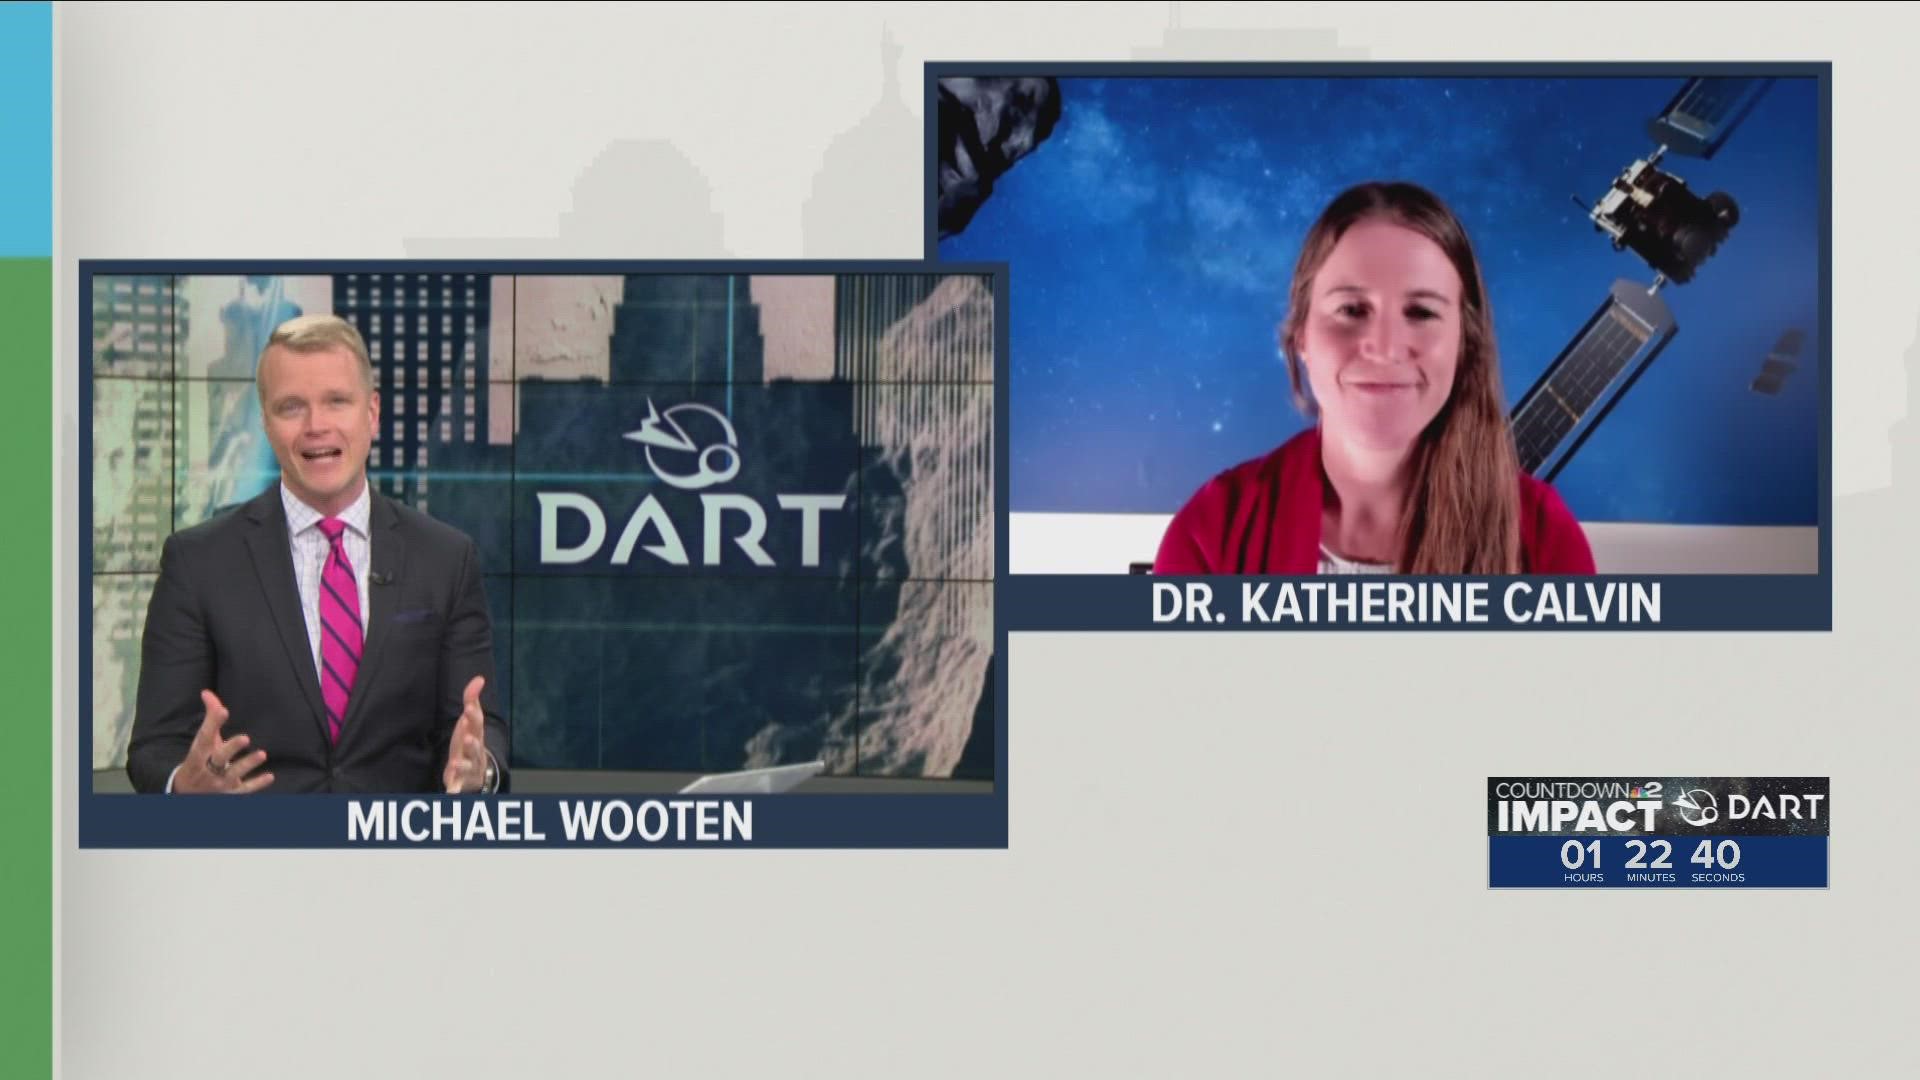 NASA chief scientist Kate Calvin joins our town hall to discuss  the DART program.